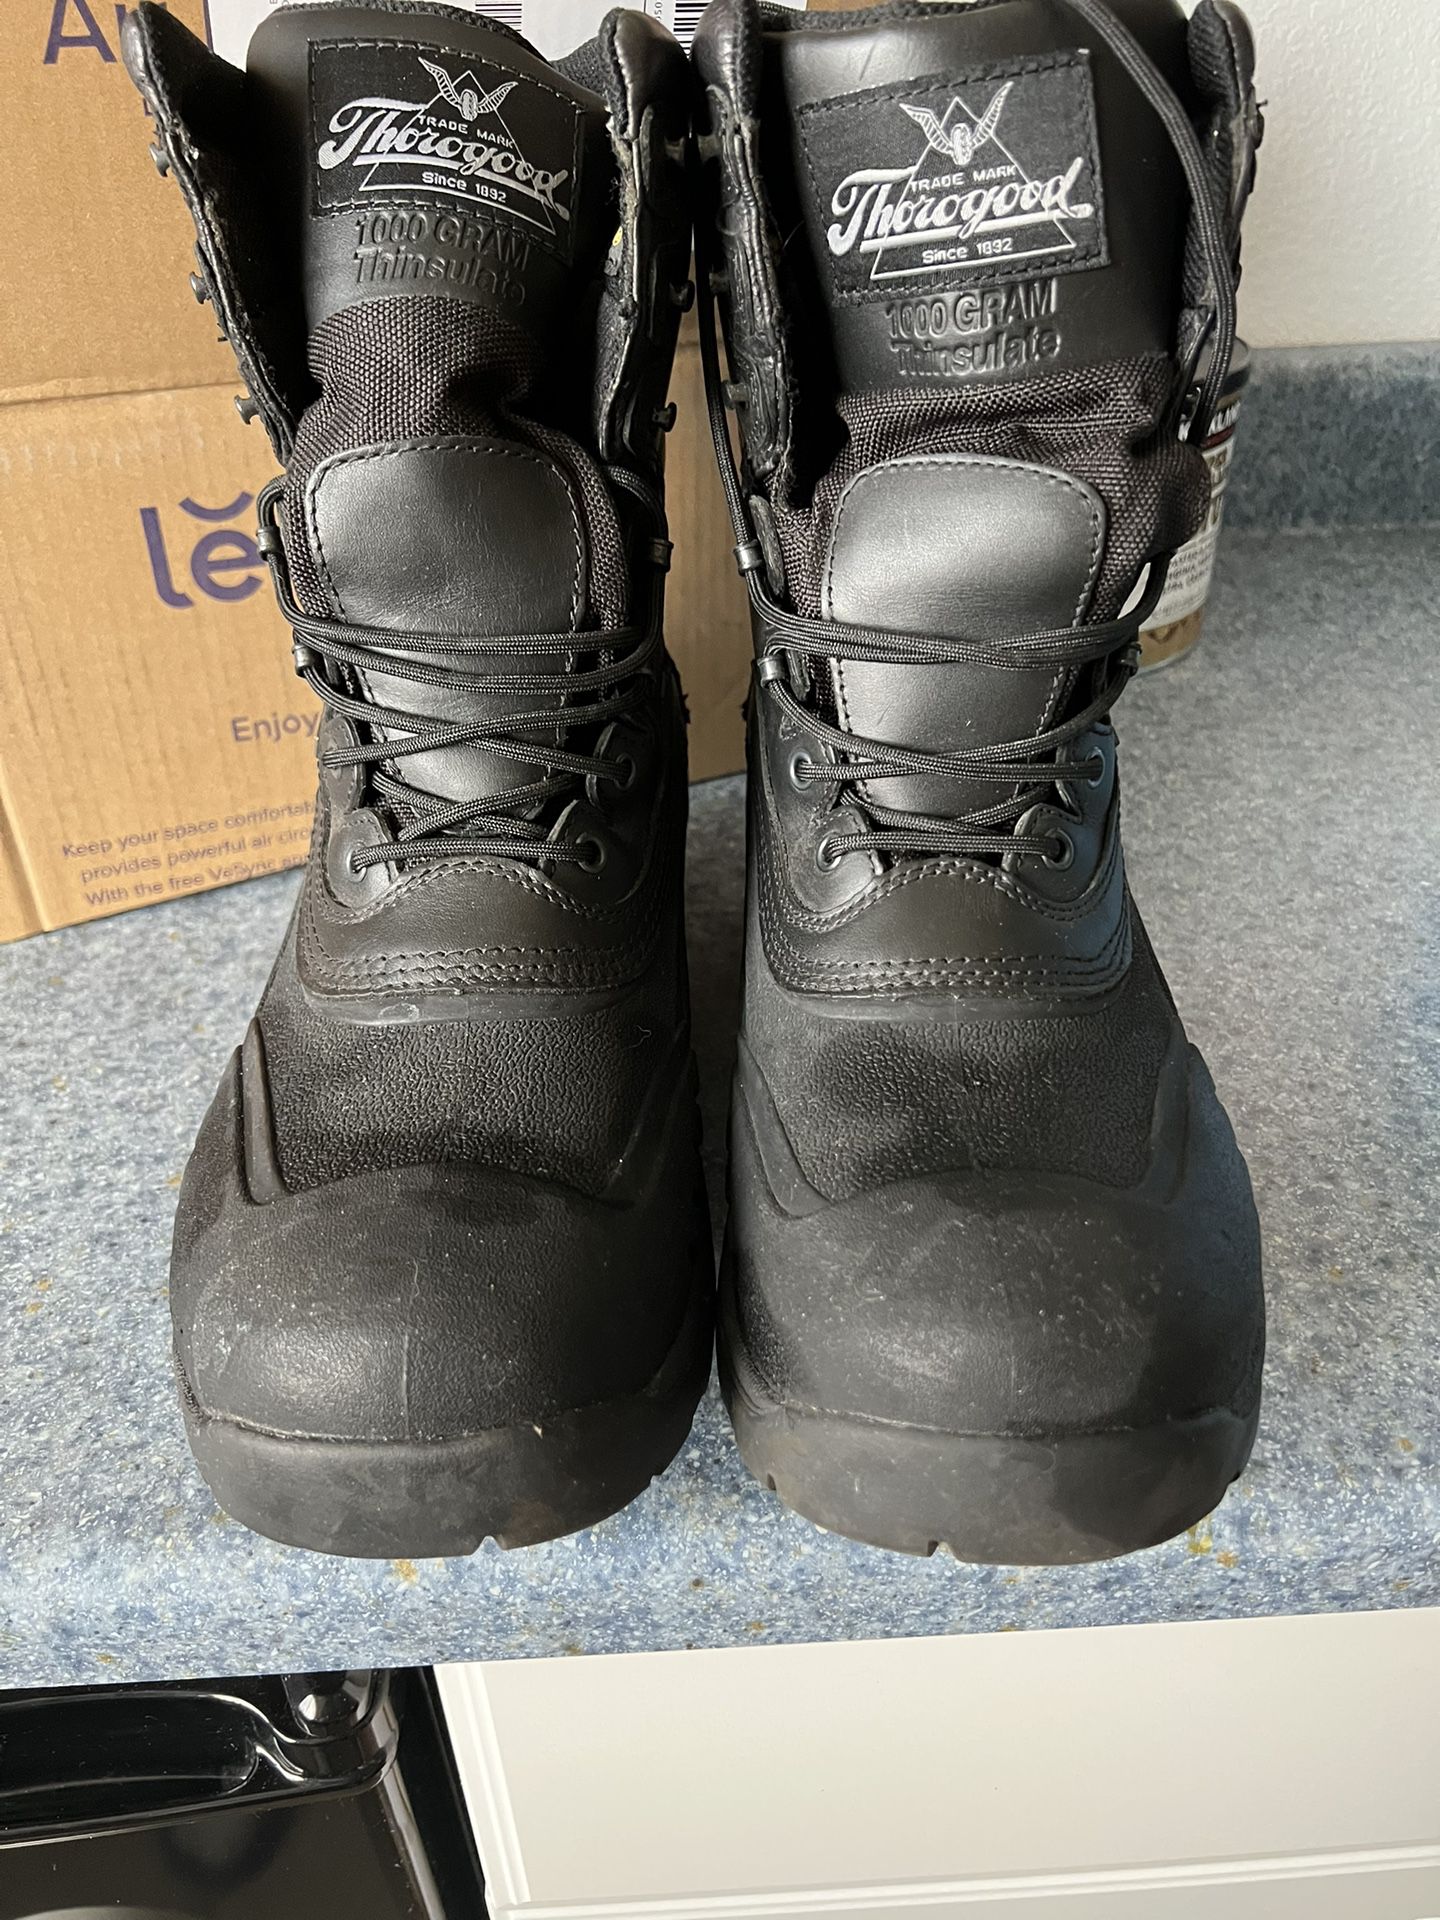 Thorogood Safety Toe Winter/ Snow Boots for Sale in Tacoma, WA - OfferUp